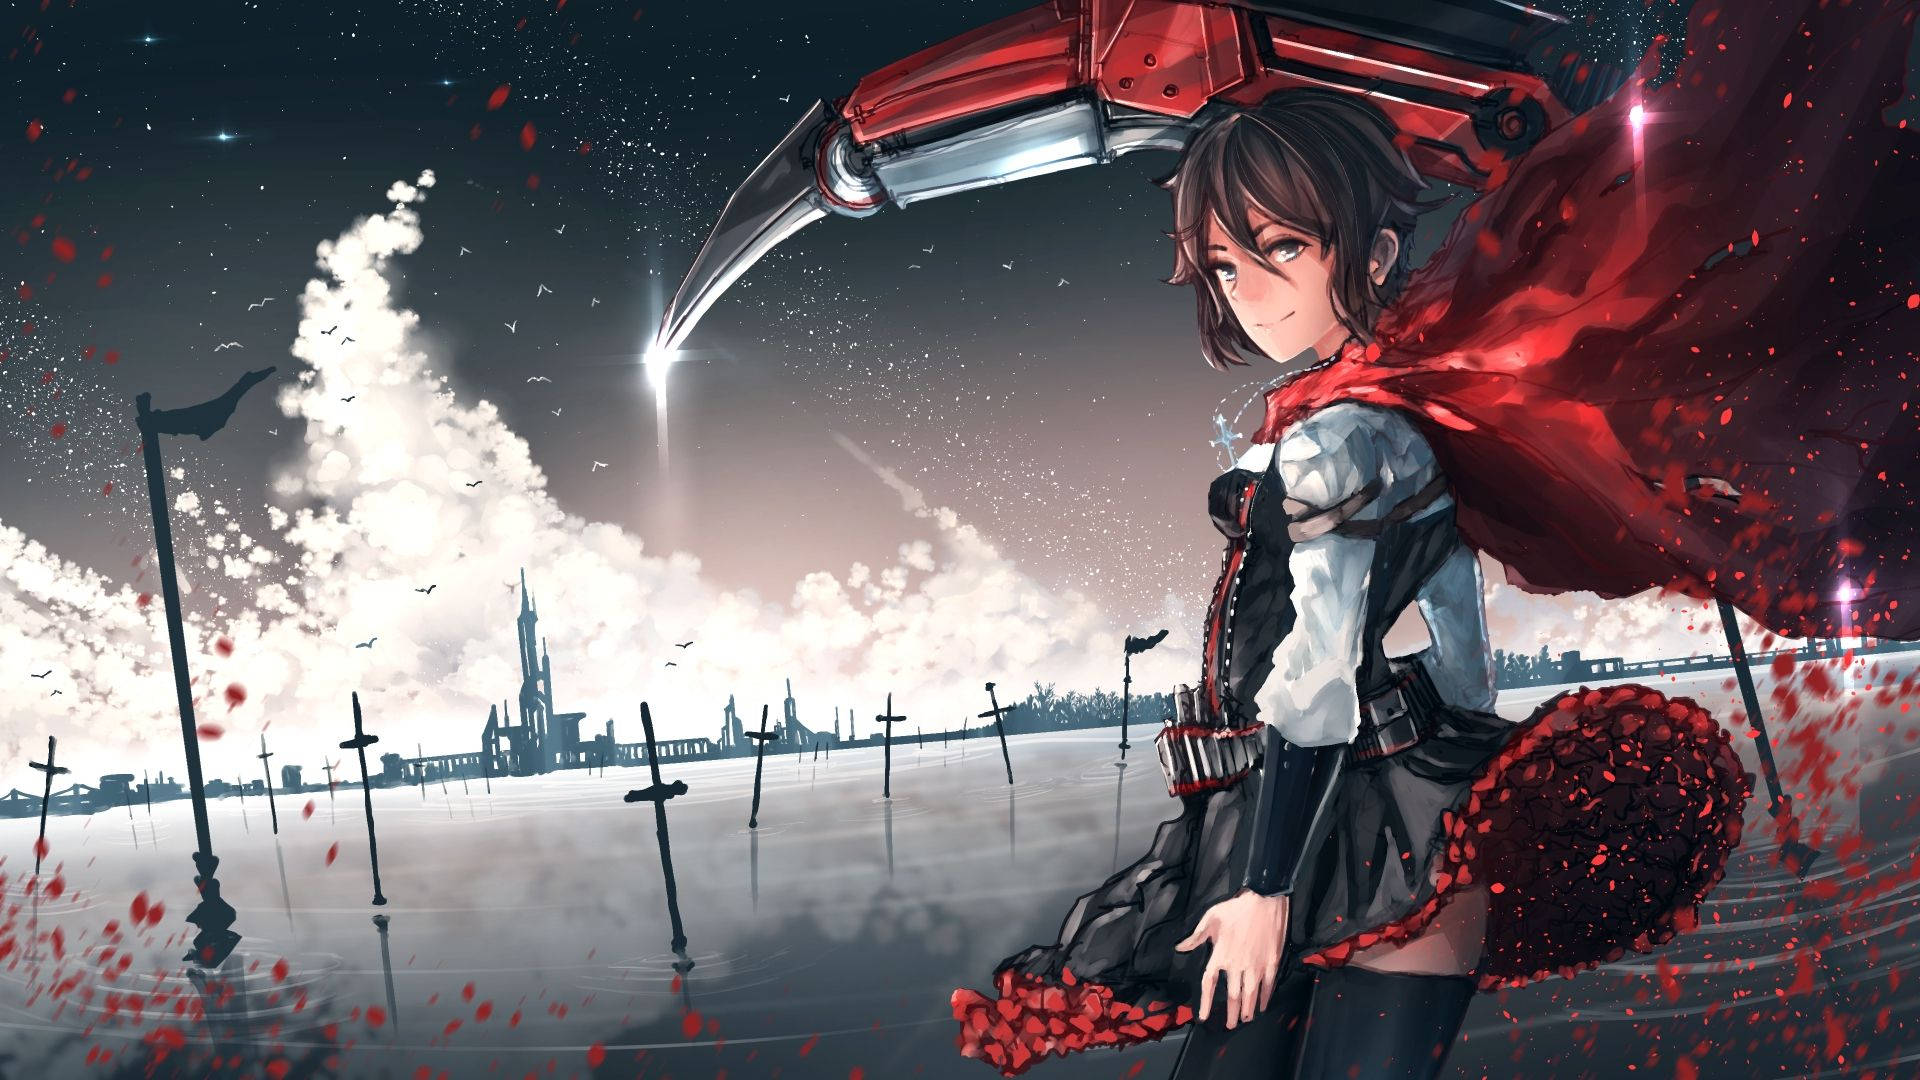 "Realistic Art Style Representation of the Rwby Anime Series" Wallpaper